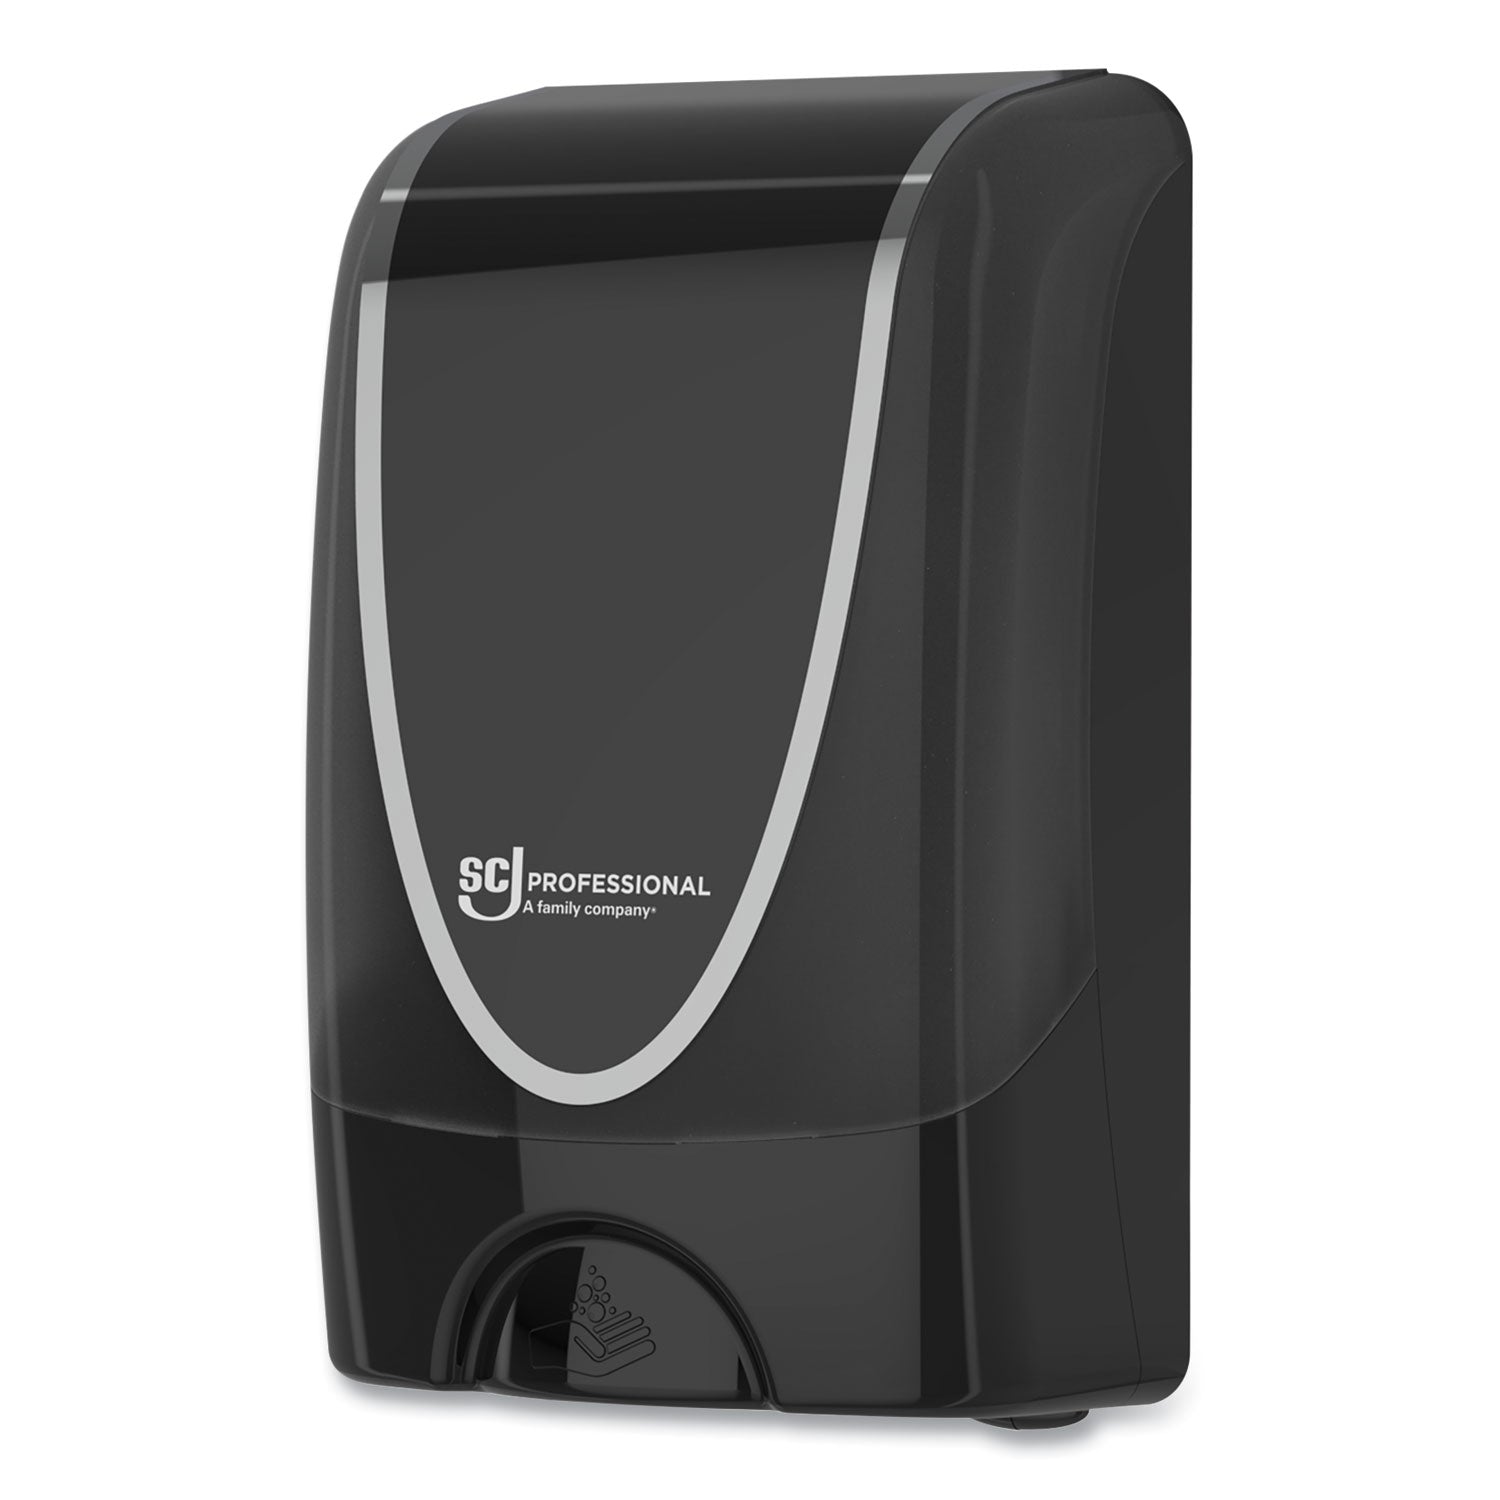 SC Johnson TouchFREE Ultra Dispenser - Automatic - 1.27 quart Capacity - Support 4 x D Battery - Compact, Touch-free, Locking Mechanism, Wear Resistant, Tear Resistant, Wall Mountable - Black - 1Each - 3